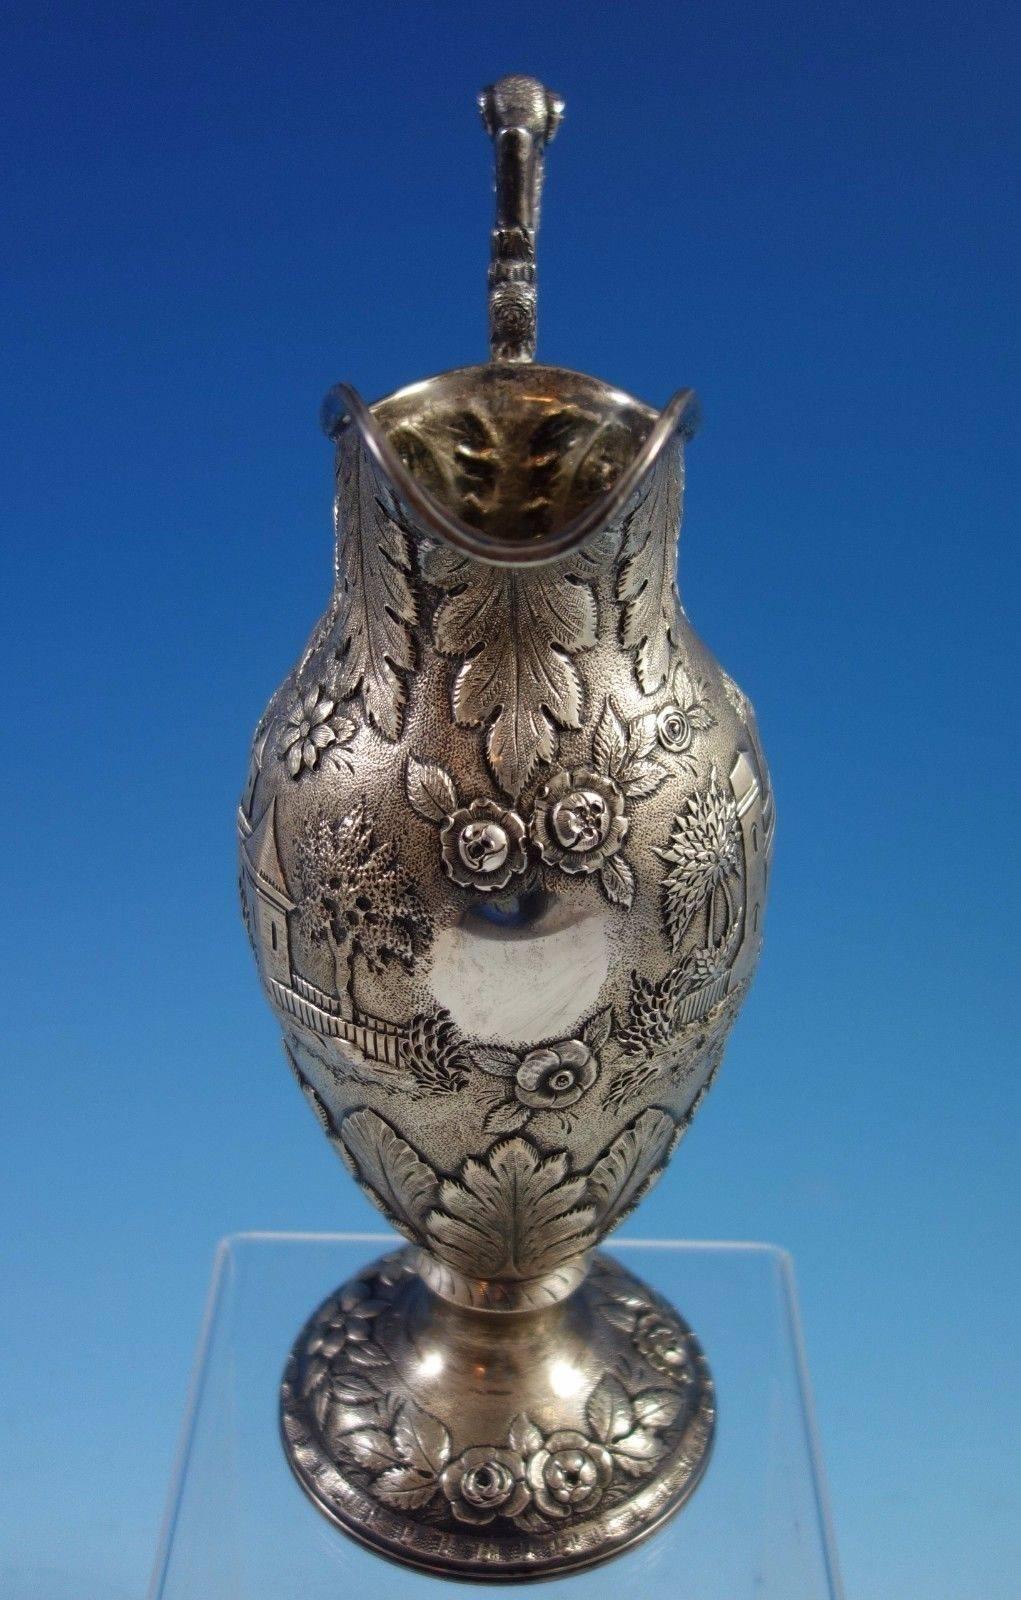 Repousse sterling silver Architectural milk pitcher handmade by A. G. Schultz of Baltimore, MD, and retailed by Hennegan and Bates. This impressive piece has repoussed architectural design including buildings/castles, trees, bird, and more. The